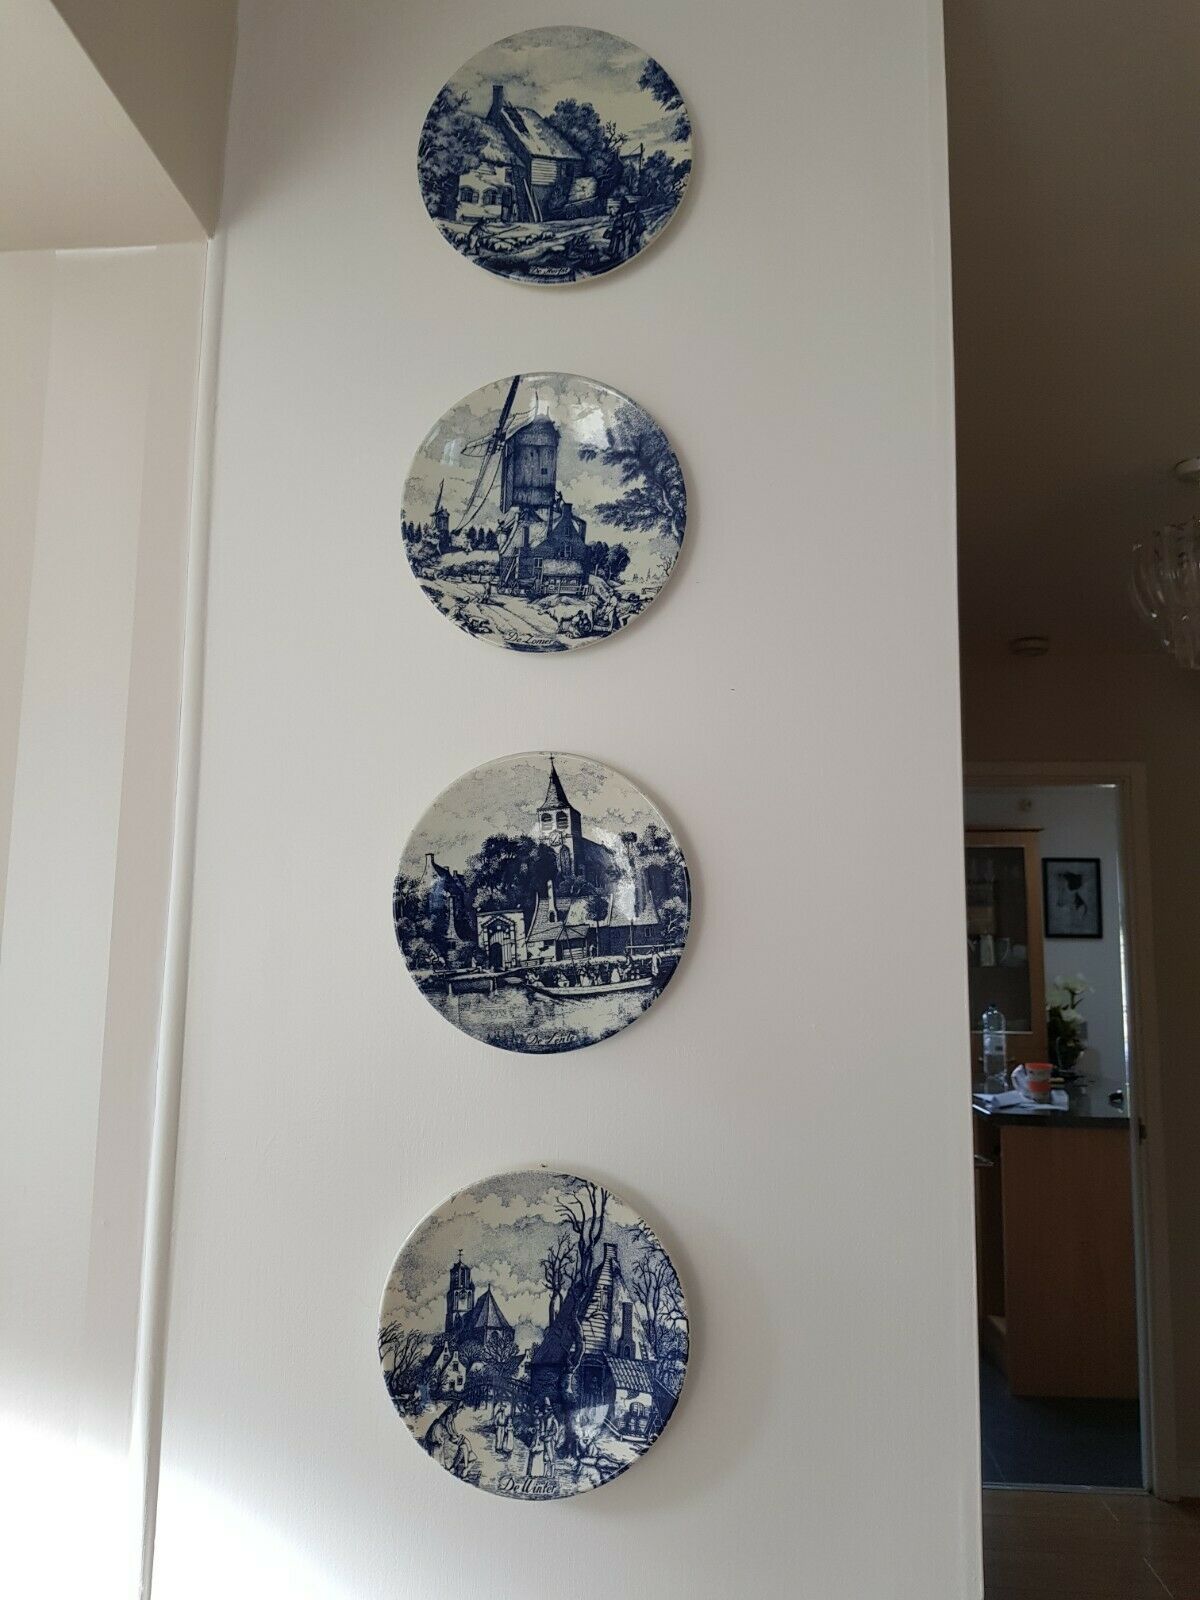 Antique Valuations: Delft vintage wall plates depicting 4 seasons. Delft pottery. Made in Holland